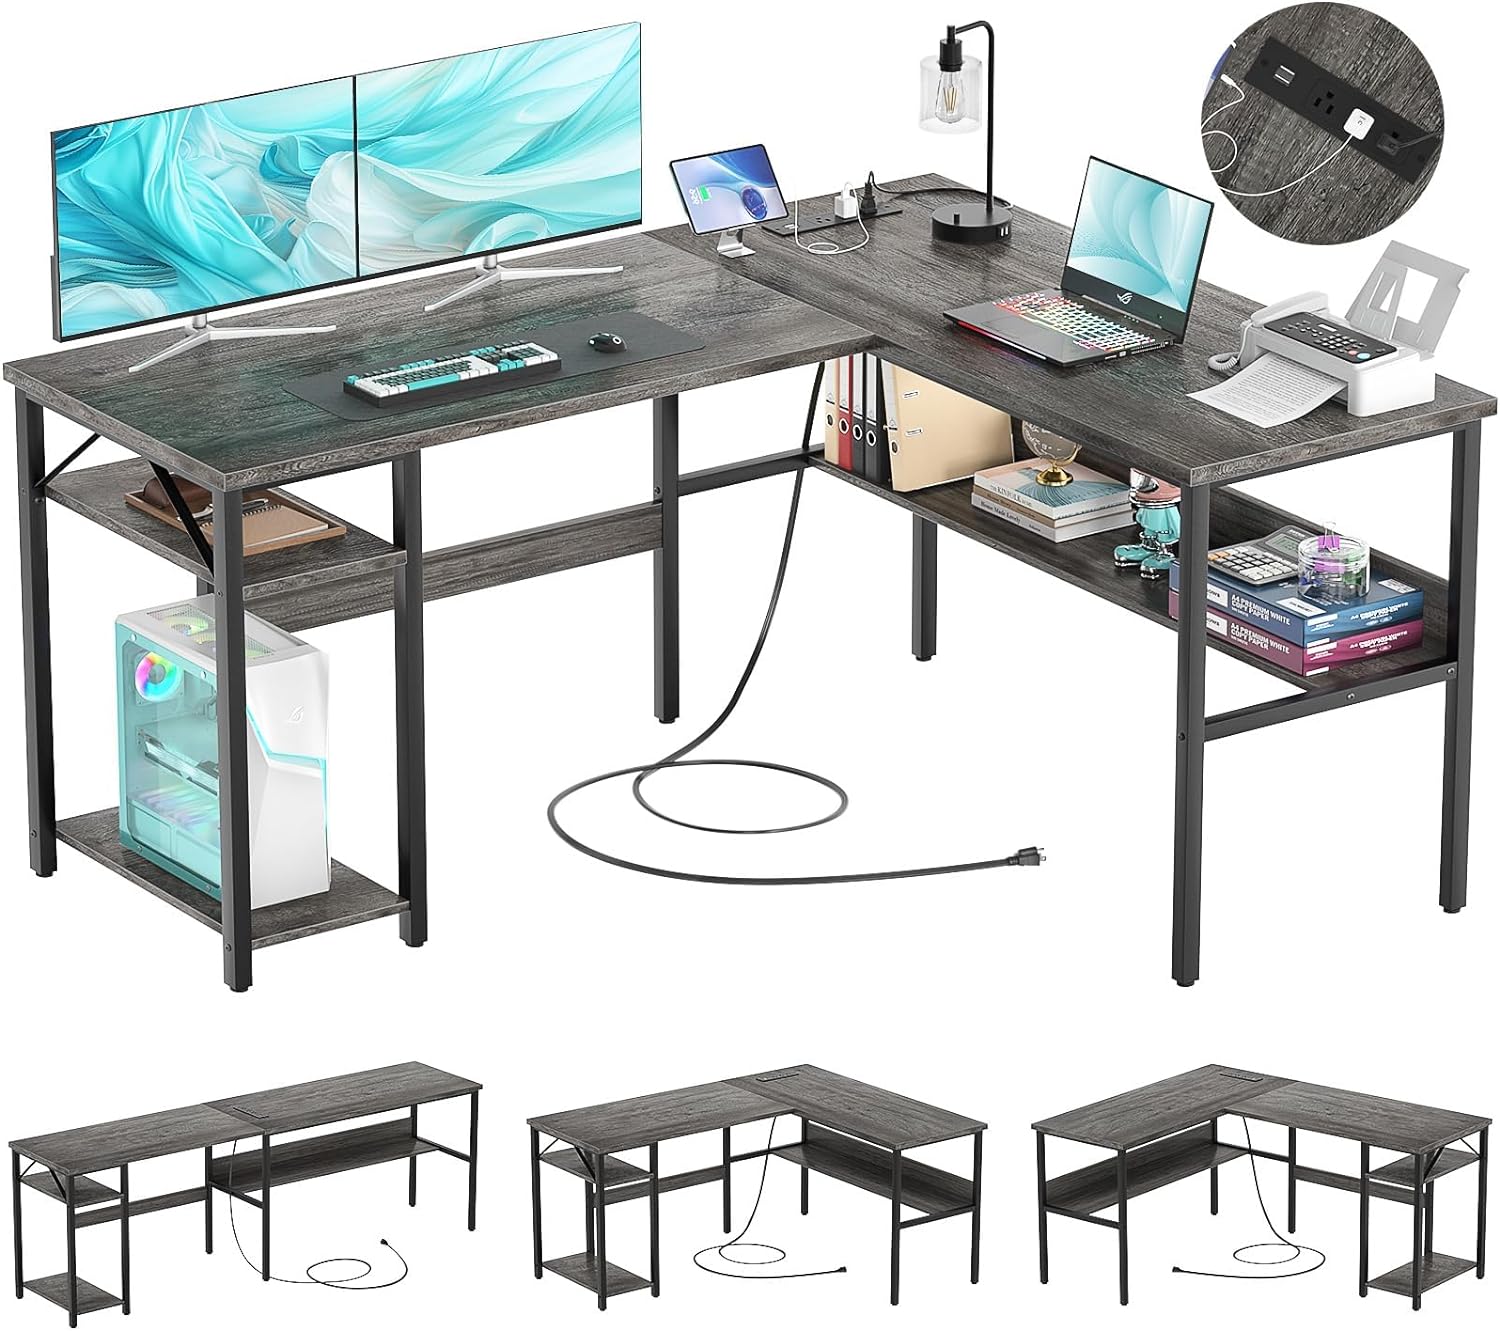 Reversible L Shaped Gaming Desk with Power Outlets and USB Charging Ports, Sturdy Computer Desk with Storage Shelf, Modern Corner Desk Home Office Table, Easy to Assemble, Gray Oak